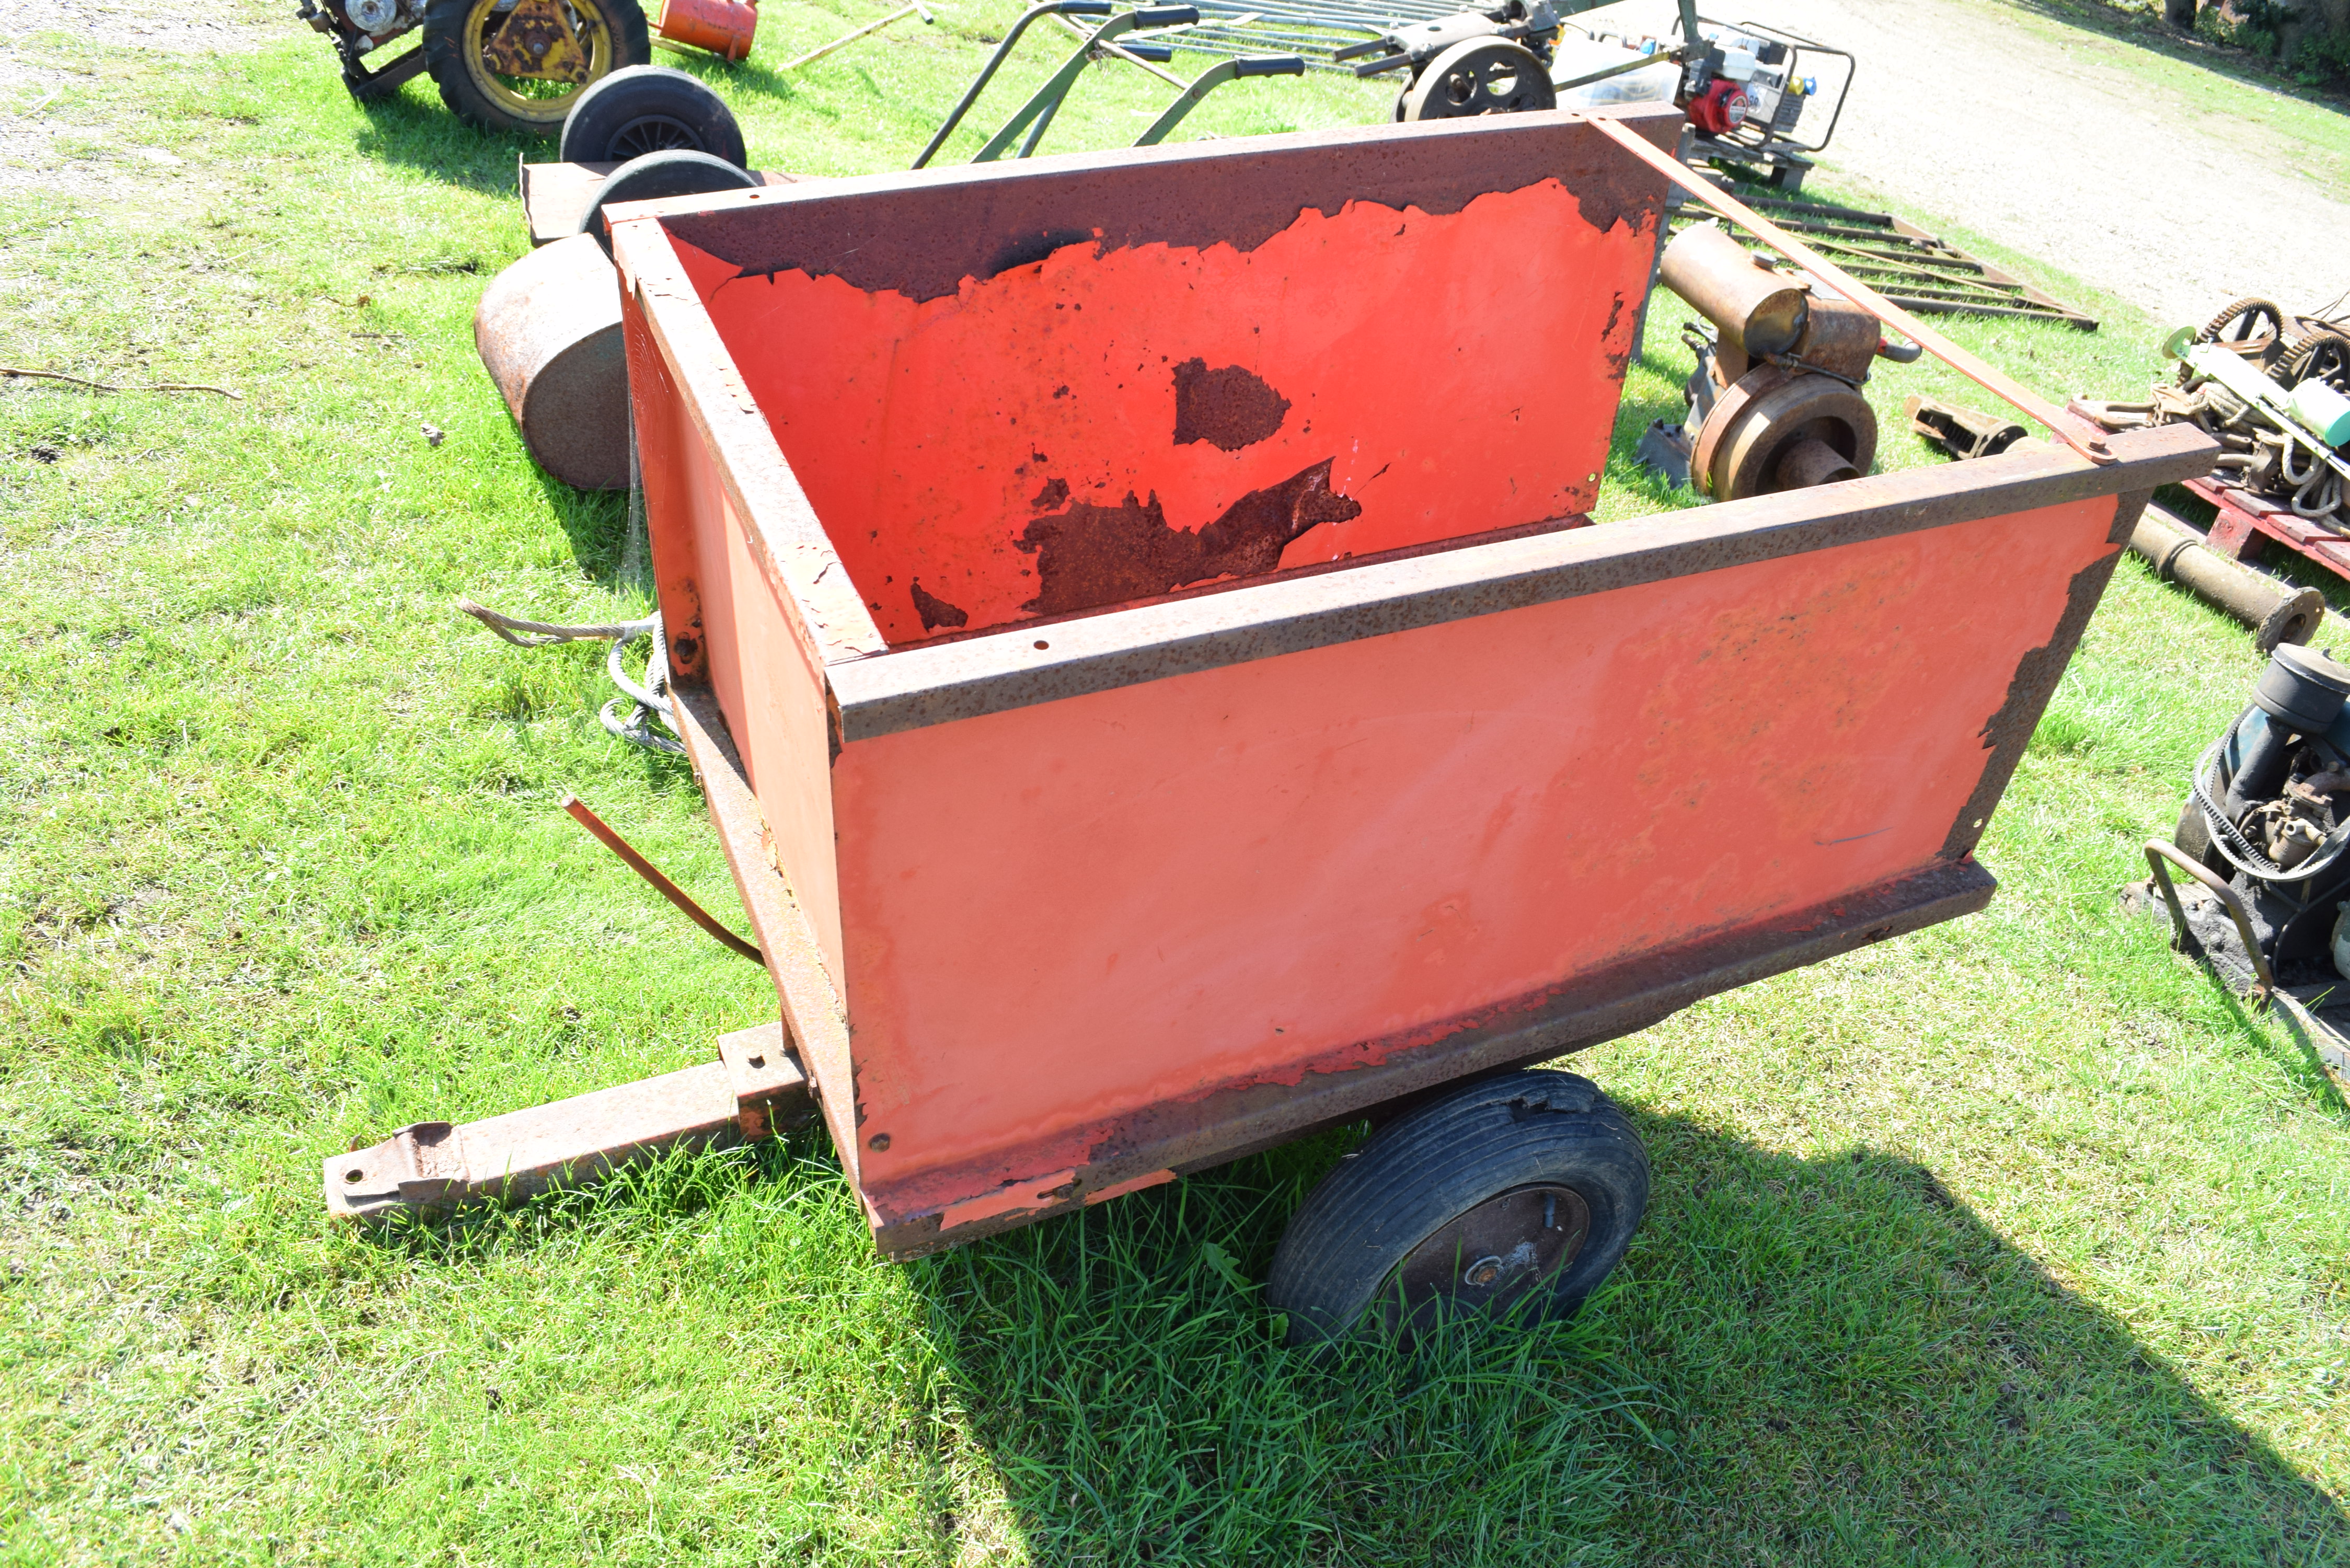 Small ride-on mower trailer